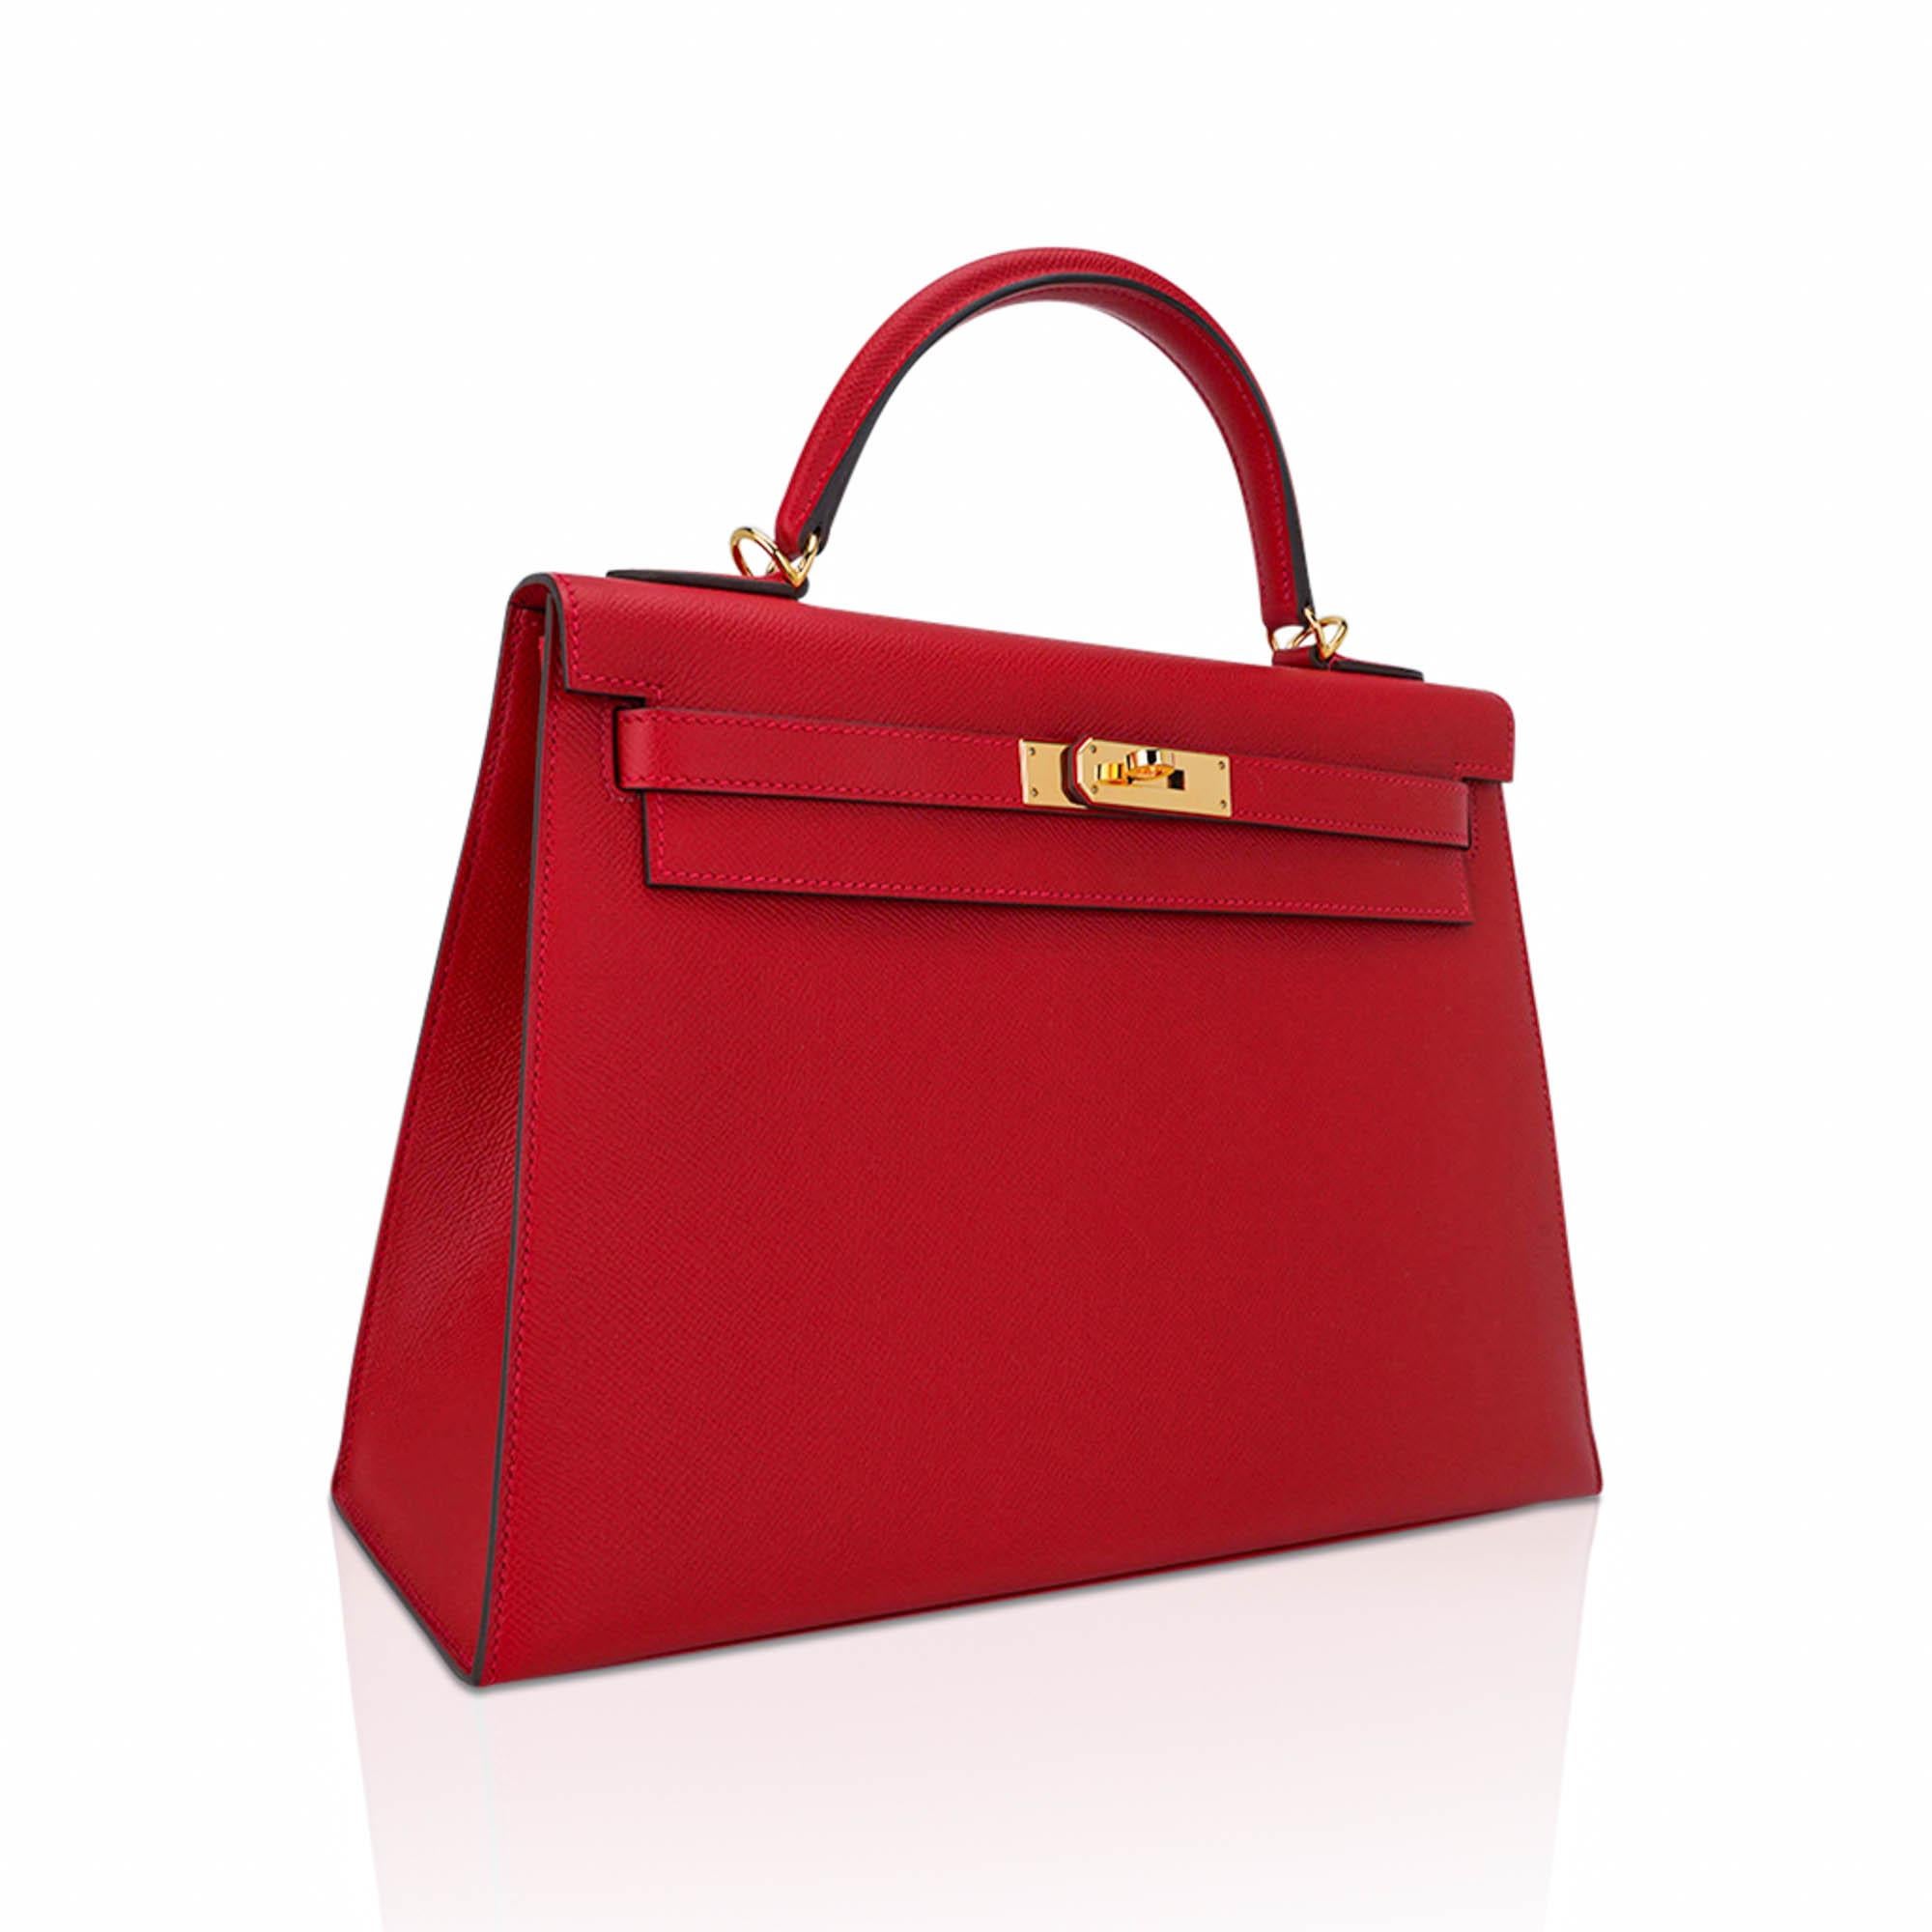 Mightychic offers an Hermes Kelly Sellier 32 bag featured in lipstick red Rouge Casaque.
Now retired, this coveted vibrant red Hermes bag is a great find!
Epsom leather is known to reveal bold vibrant colours to their full glory.
This beautiful